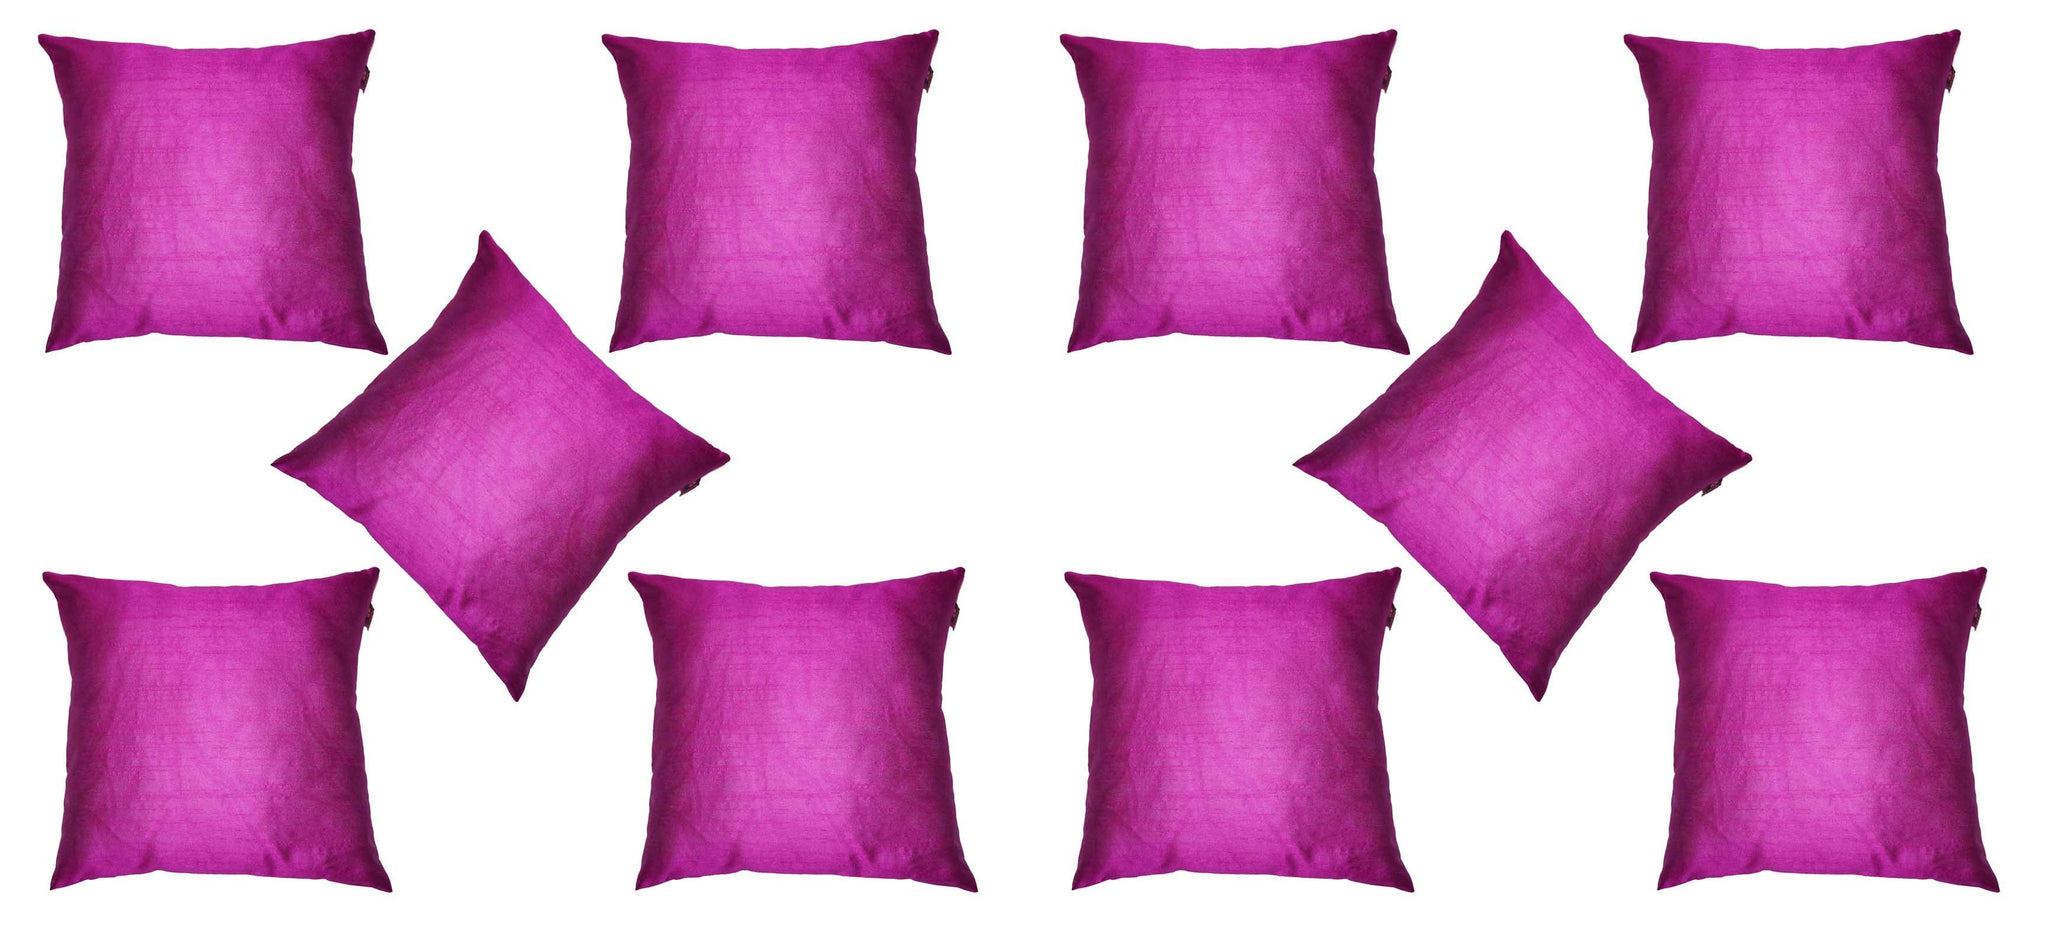 Lushomes Pink Dupion Silk Cushion Covers (Pack of 10) - Lushomes